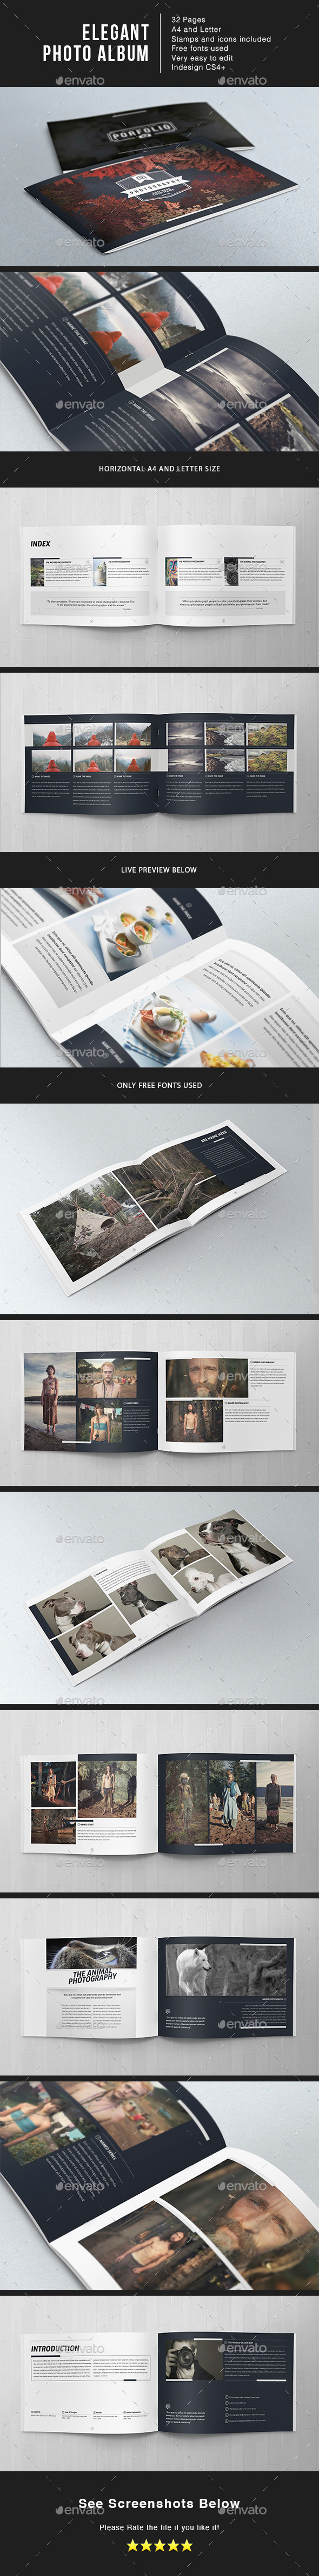 Elegant Photo Album Template A4 Letter By Luuqas Graphicriver